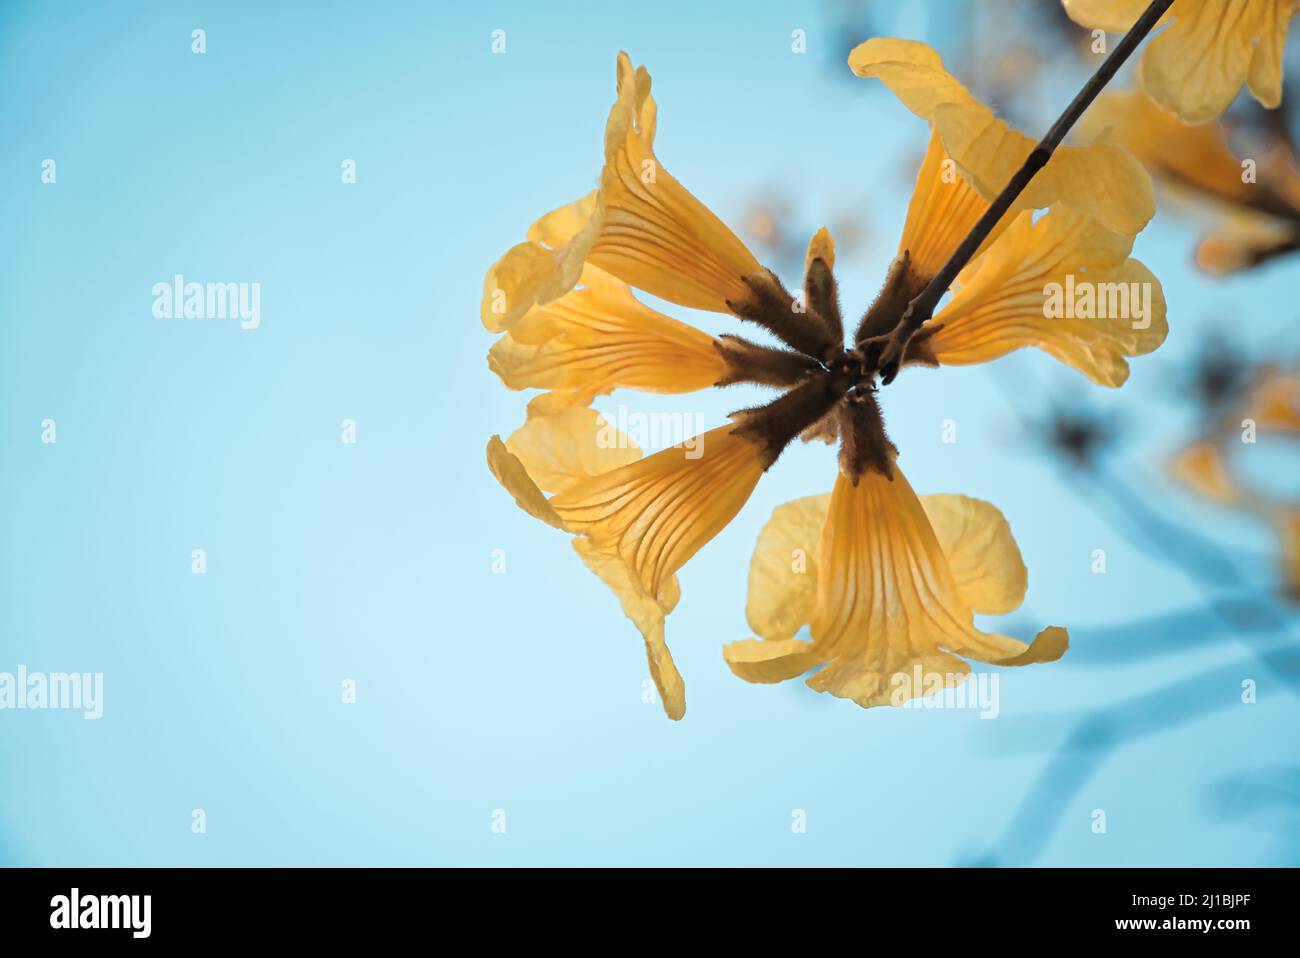 A yellow Pui Flower (Tabebuia chrysantha) with blue sky in the background Stock Photo